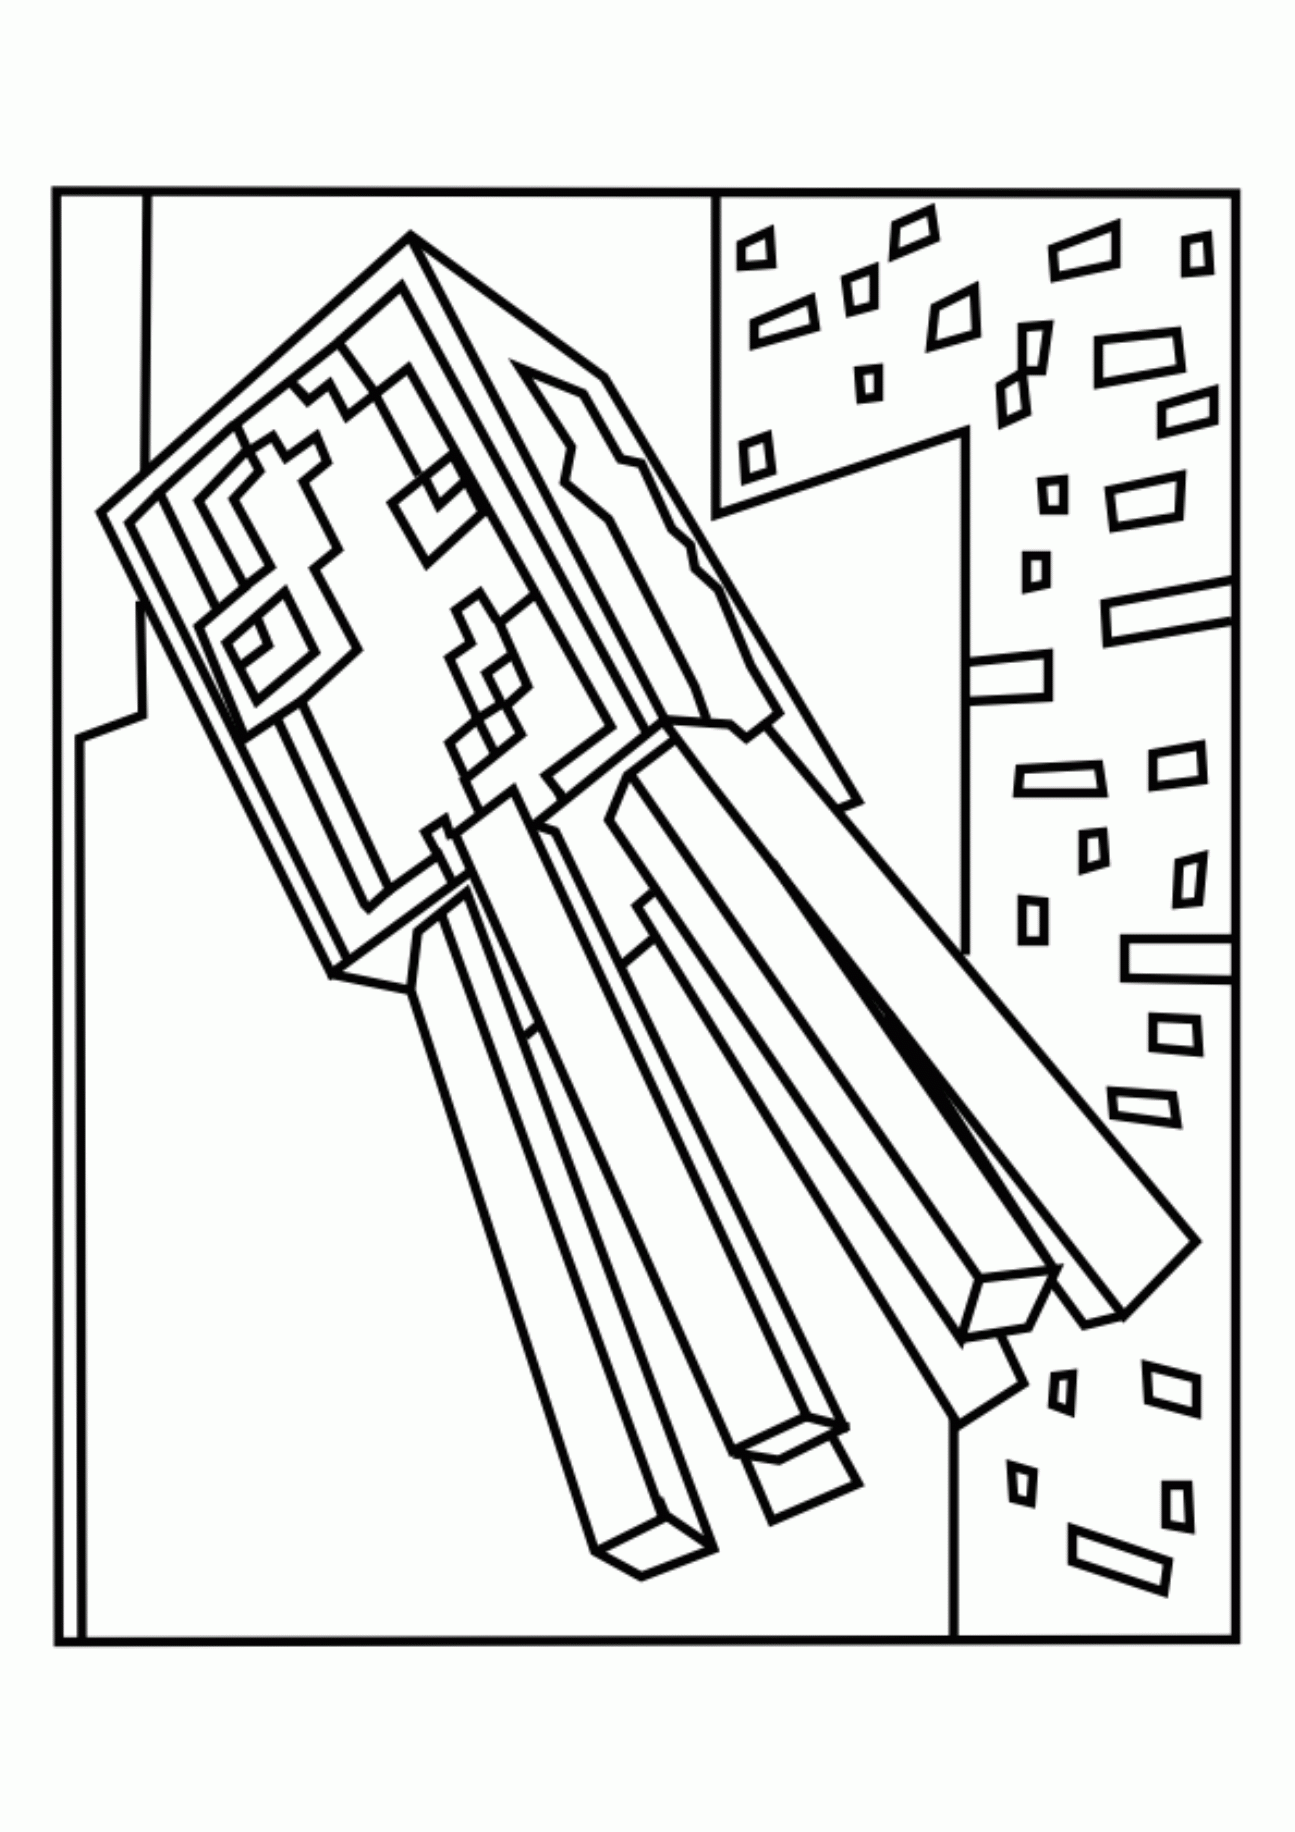 Best Minecraft Squid and Spider Coloring Pages - Free, printable ...